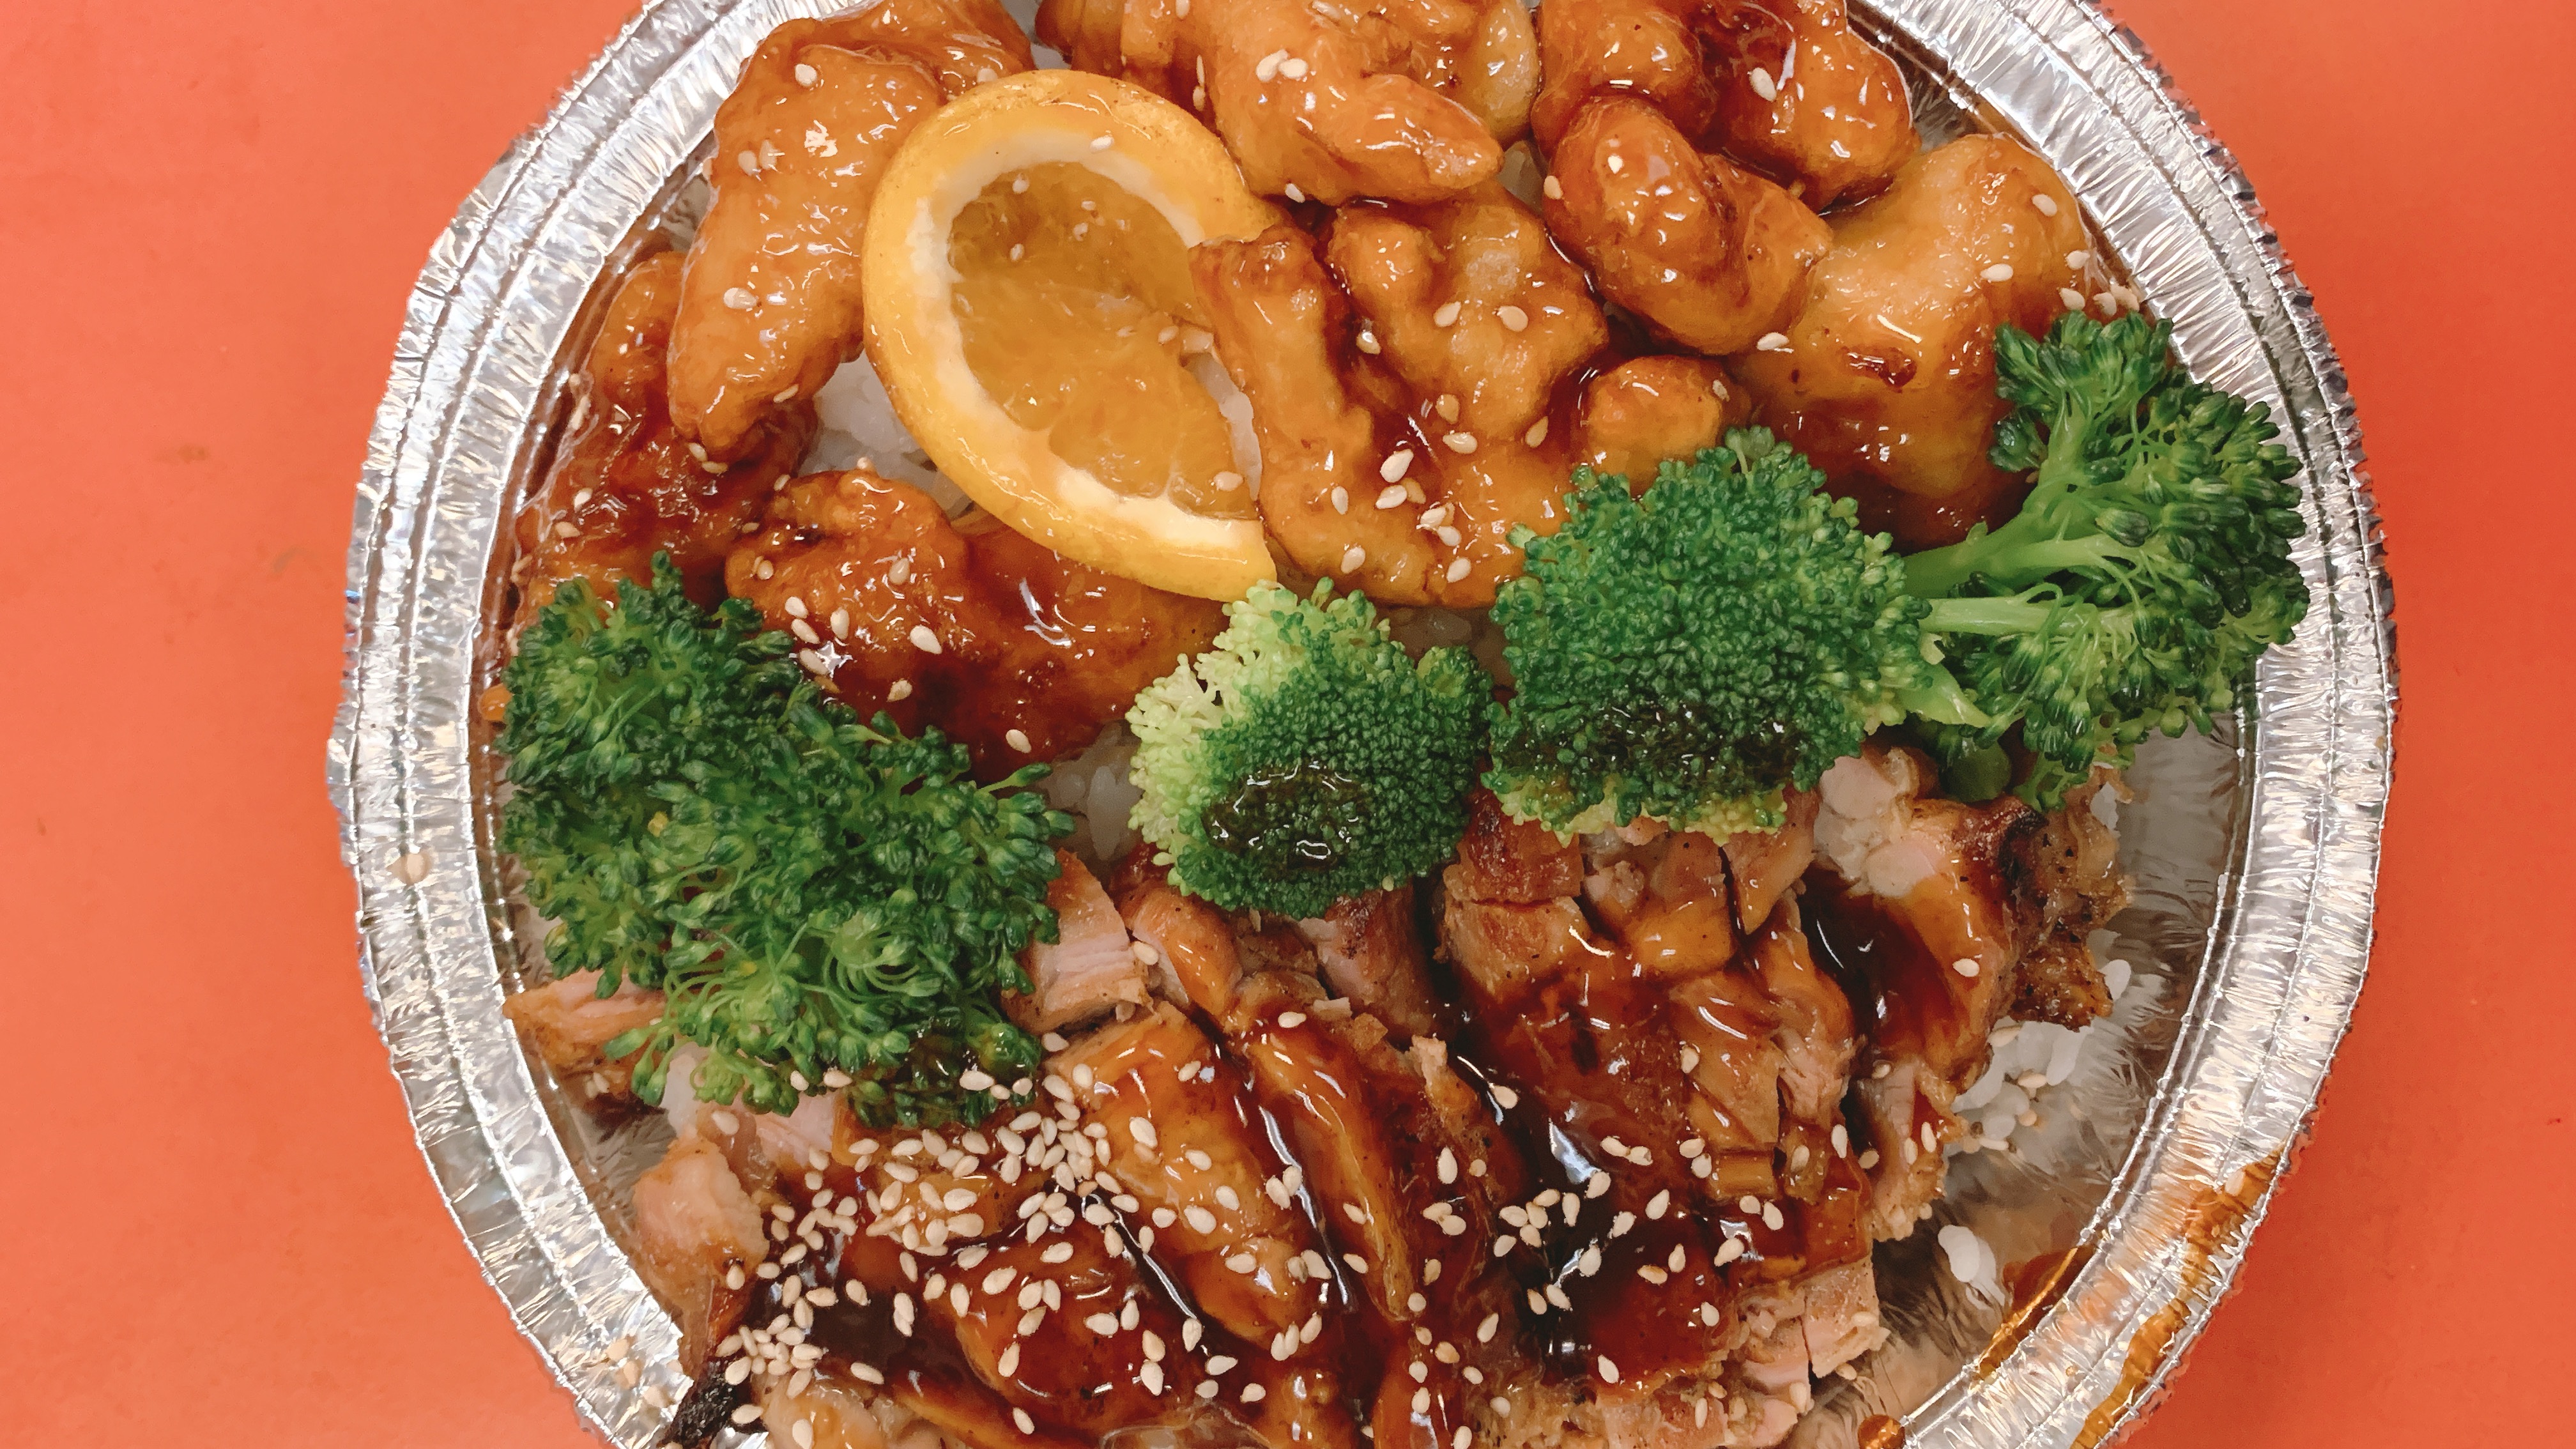 Tokyo Express's Delivery & Takeout Near You - DoorDash